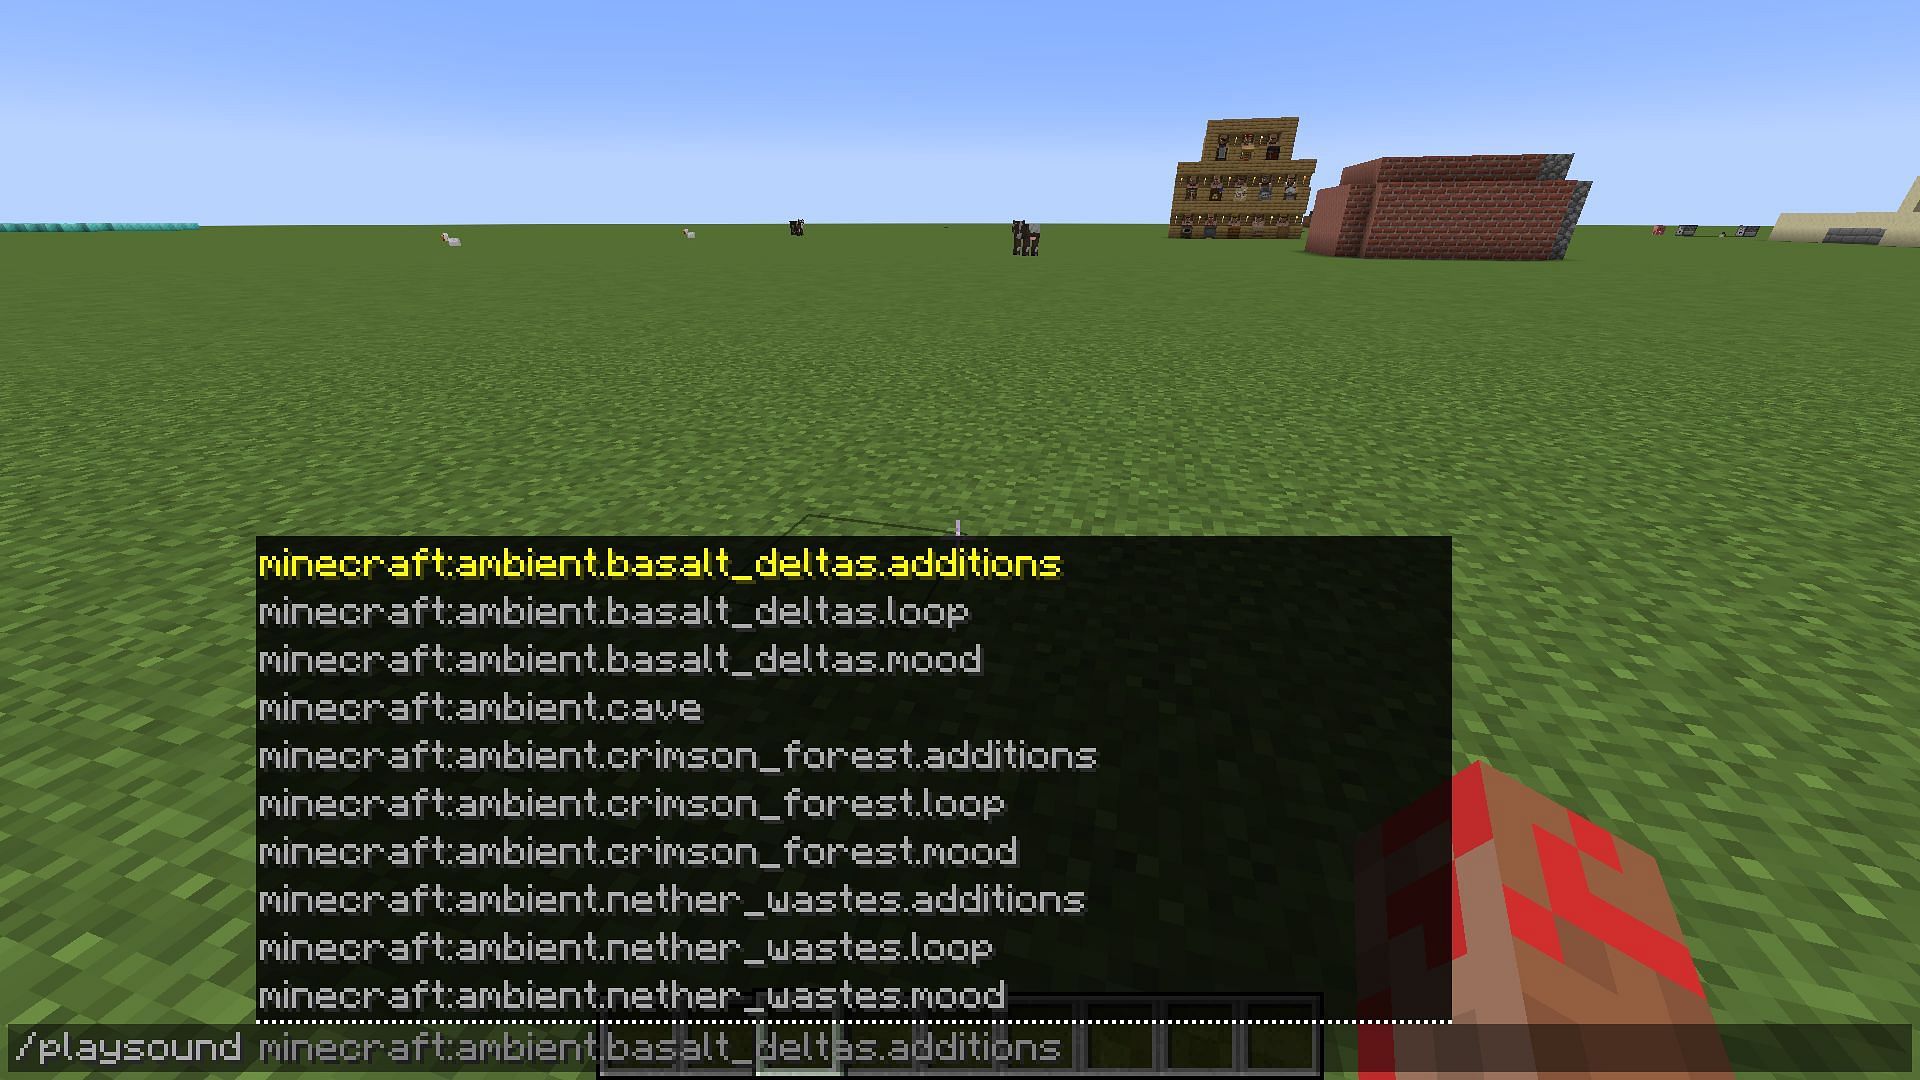 The /playsound command can be used to play any kind of sound in Minecraft, including cave sounds (Image via Mojang)